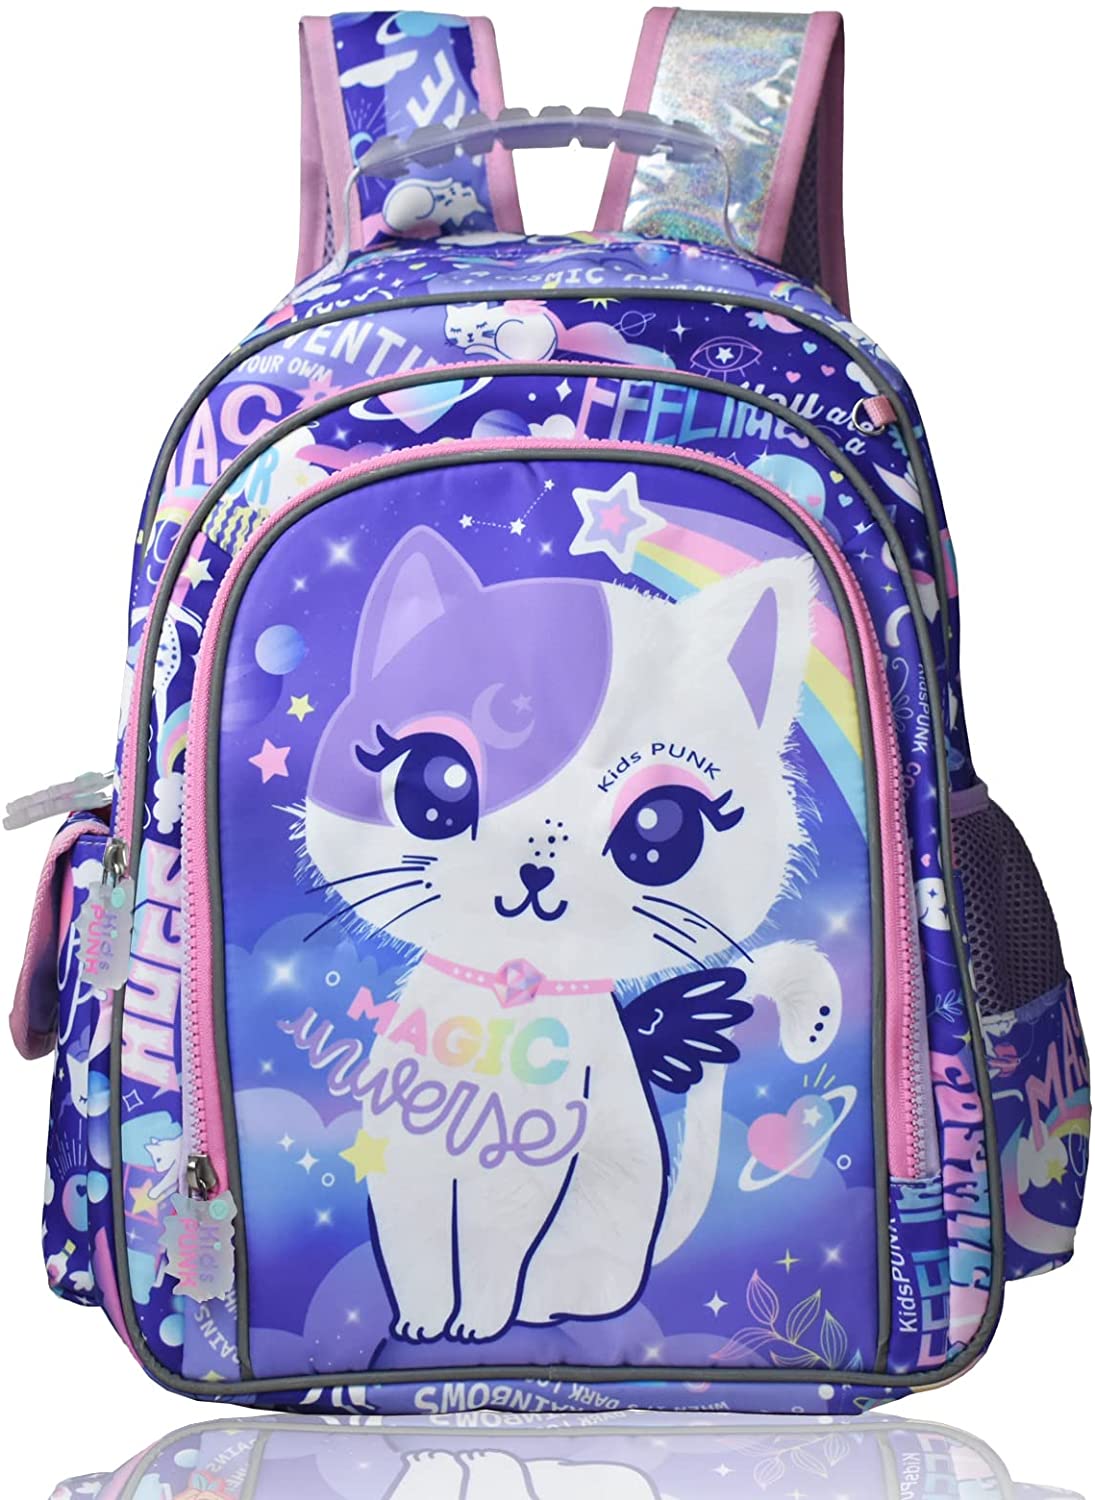 Renewold Black Cat School Backpack Purse for Girls Kids School Bag with  Lunch Box Pencil Case Elementary Primary High Schoolbags Bookbag Large